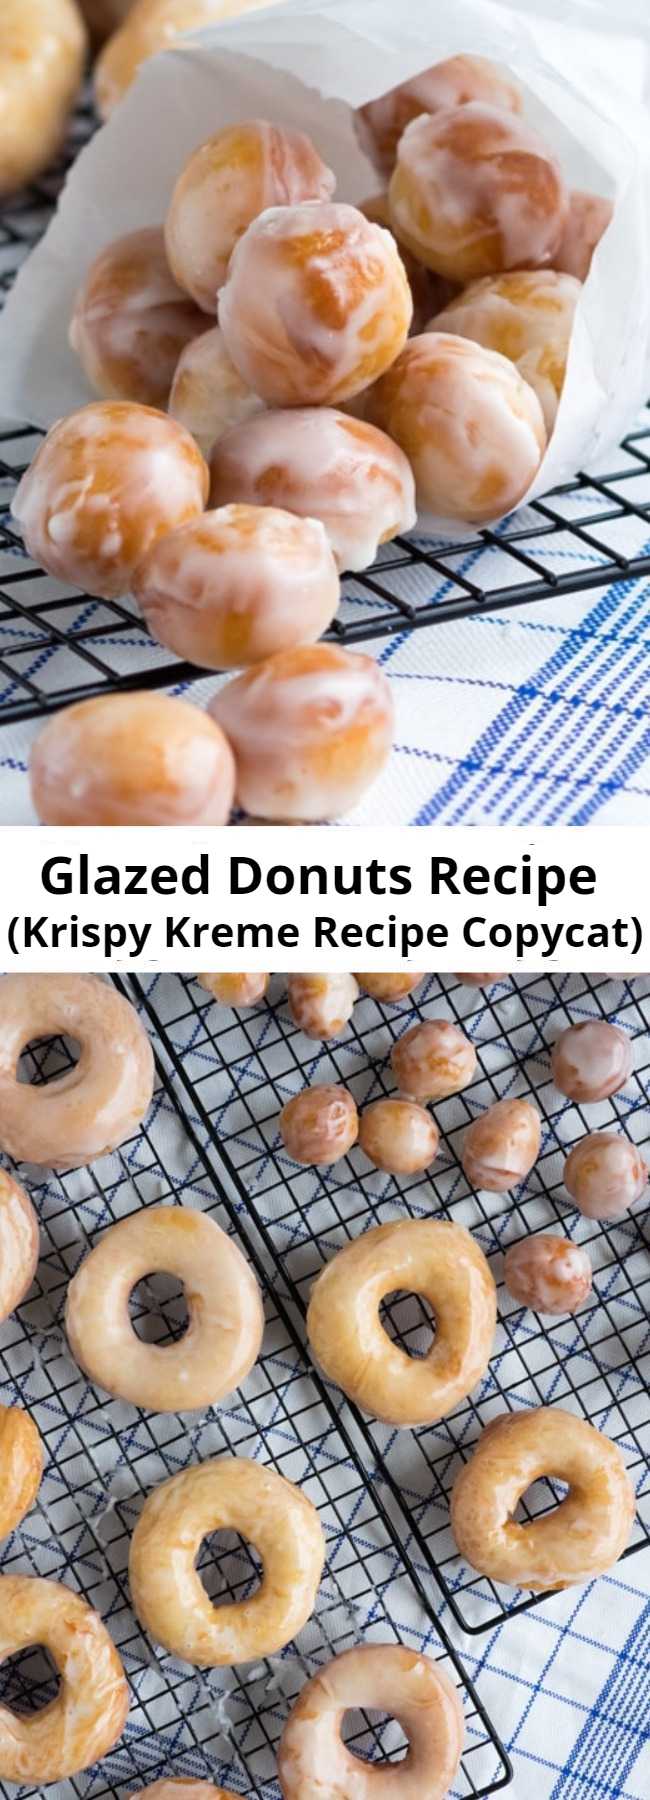 Glazed Donuts Recipe ( Krispy Kreme Recipe Copycat) - These original glazed donuts are light and chewy and a good way to get anyone out of bed in the morning. Who can resist a Krispy Kreme recipe copycat?